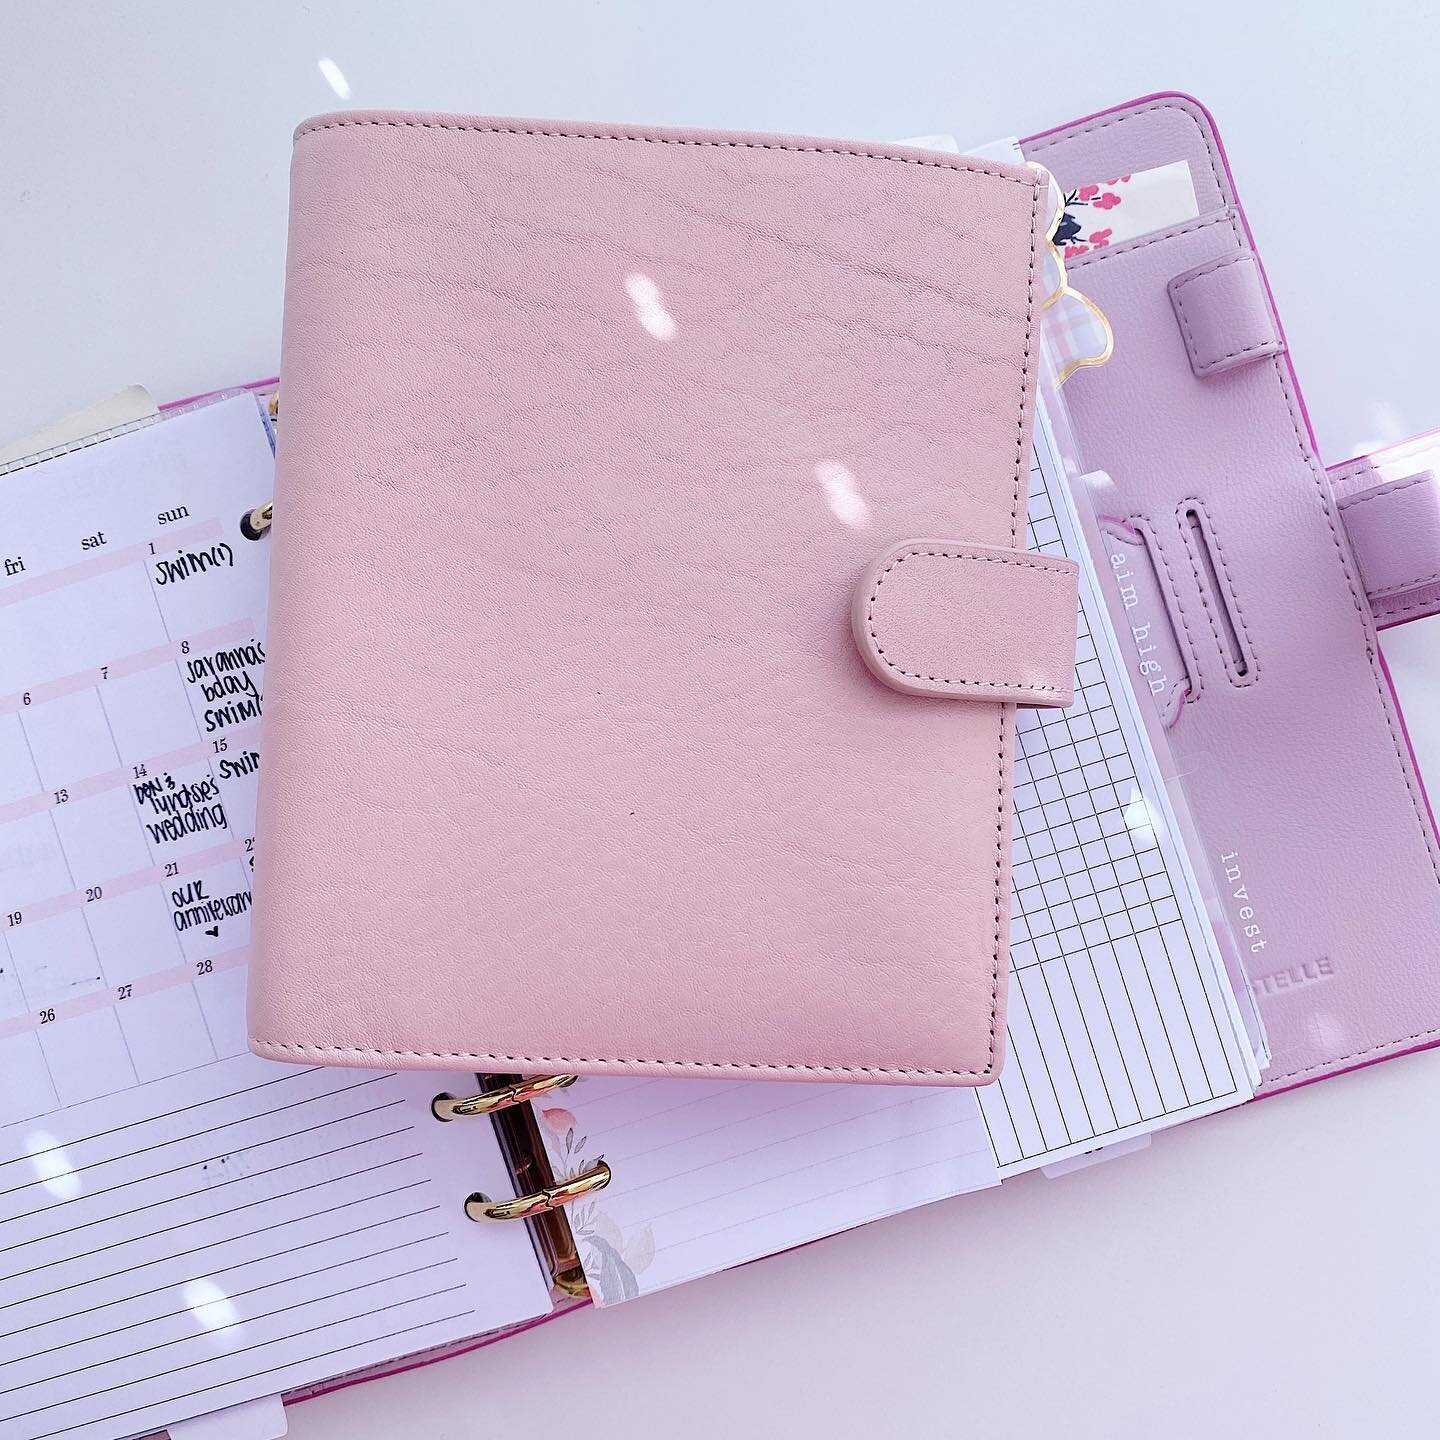 Yesterday was pay day so it&rsquo;s this little thing&rsquo;s time to shine! Pocket XL finance planner 🌸